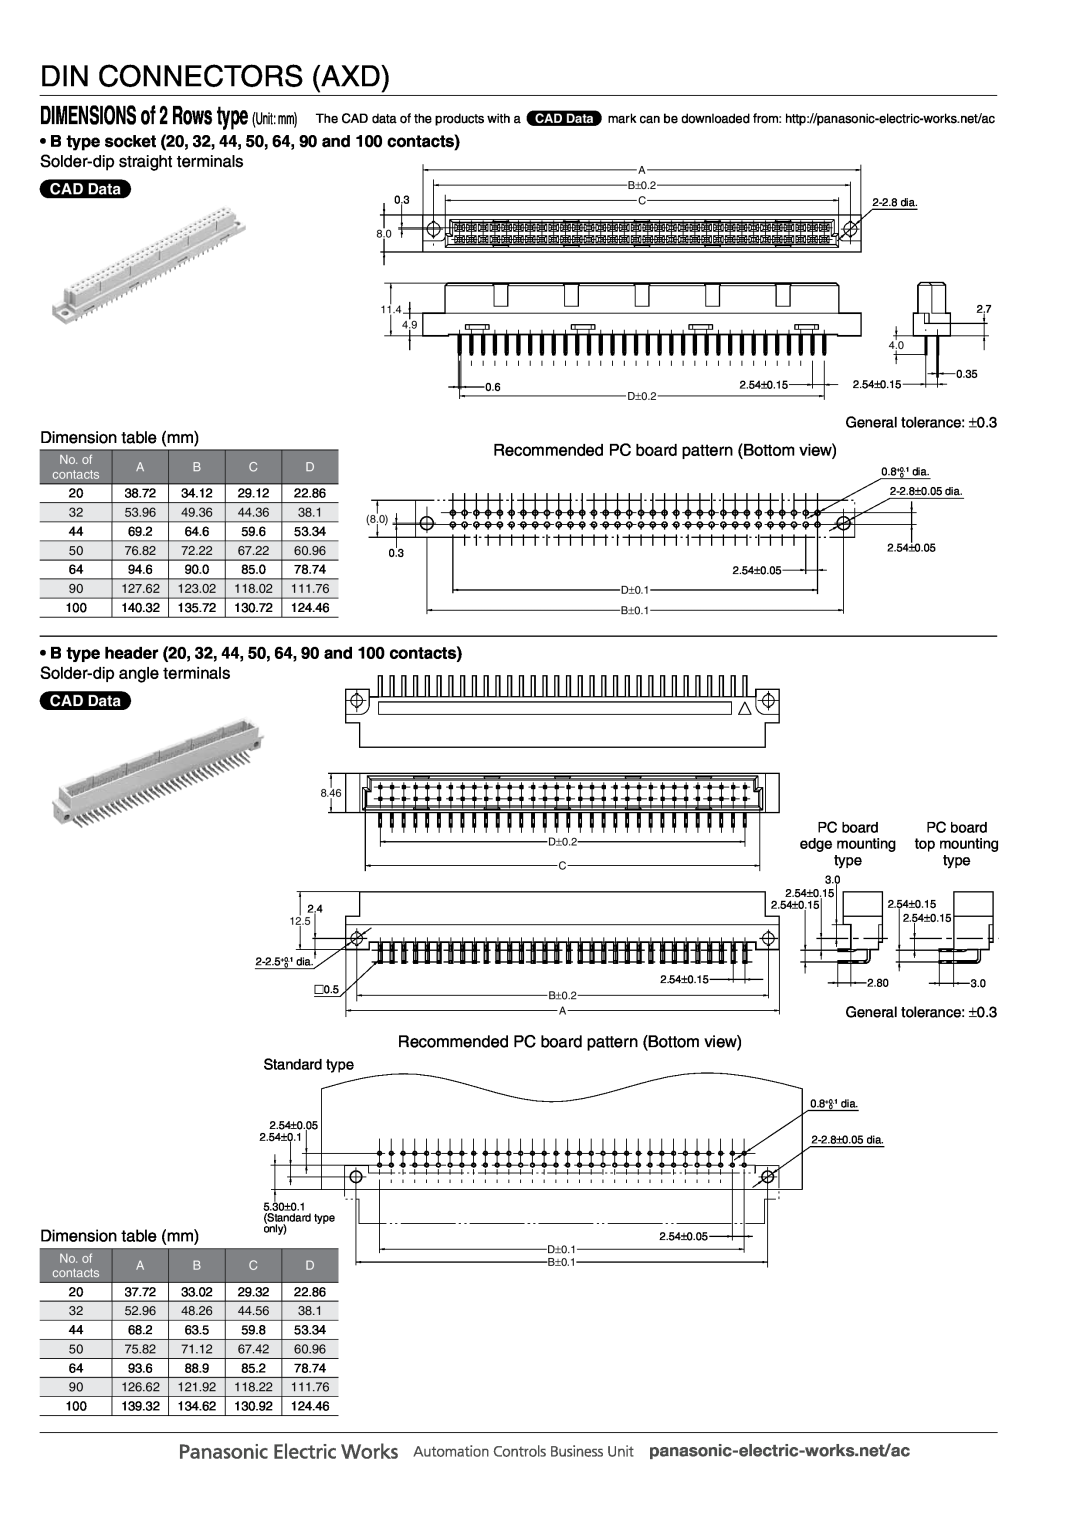 Panasonic DIN Connectors B type socket 20, 32, 44, 50, 64, 90 and 100 contacts, Solder-dip straight terminals, CAD Data 